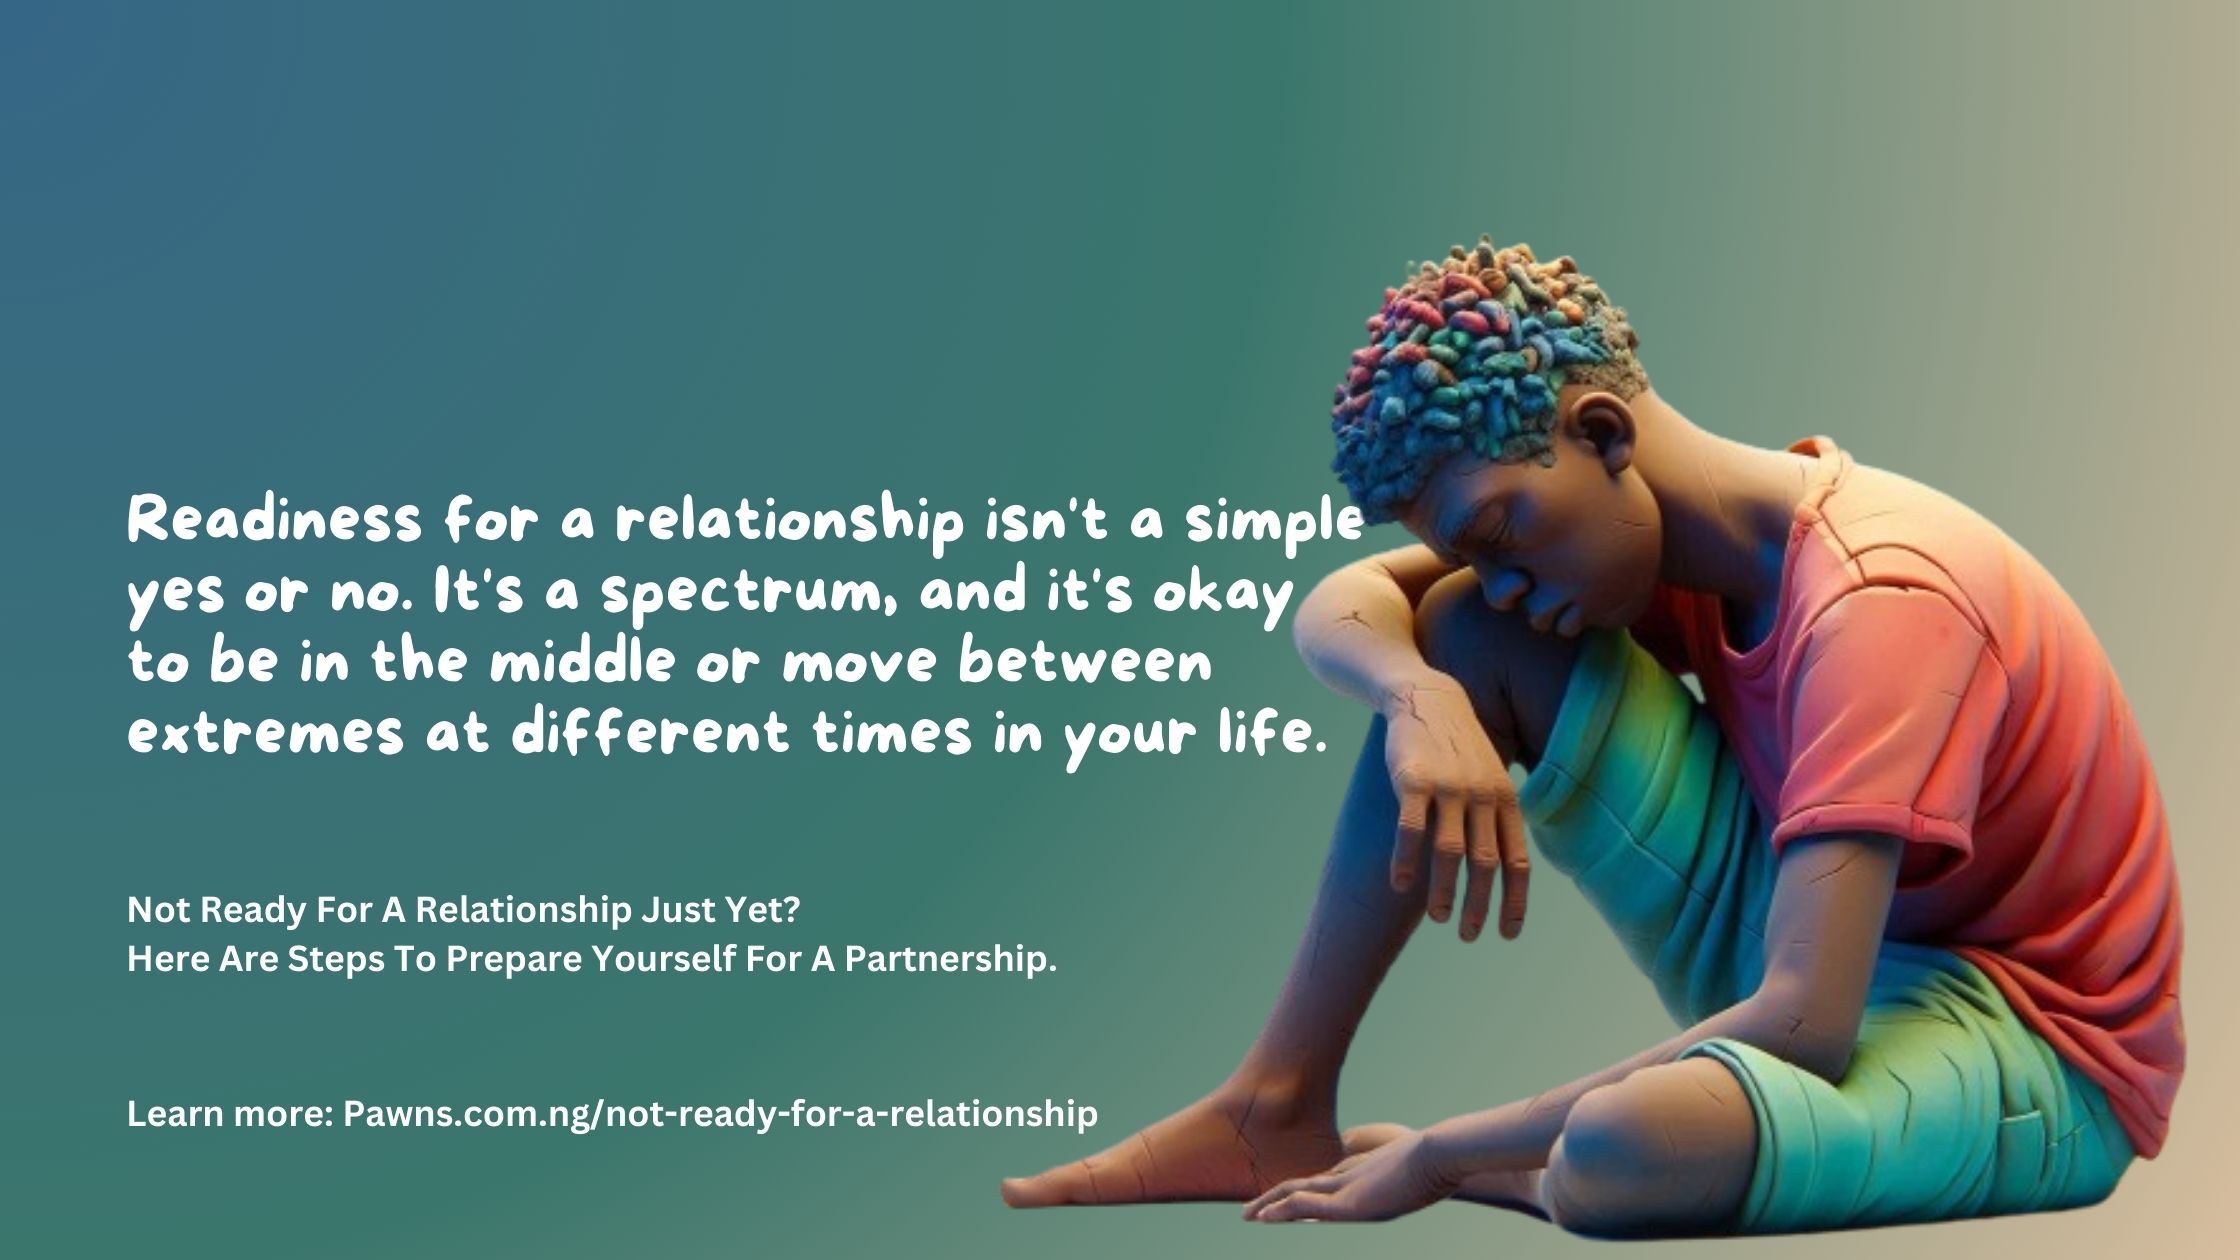 Not Ready For A Relationship Just Yet Here Are Steps To Prepare Yourself For A Partnership. Readiness for a relationship isn't a simple yes or no. It's a spectrum, and it's okay to be